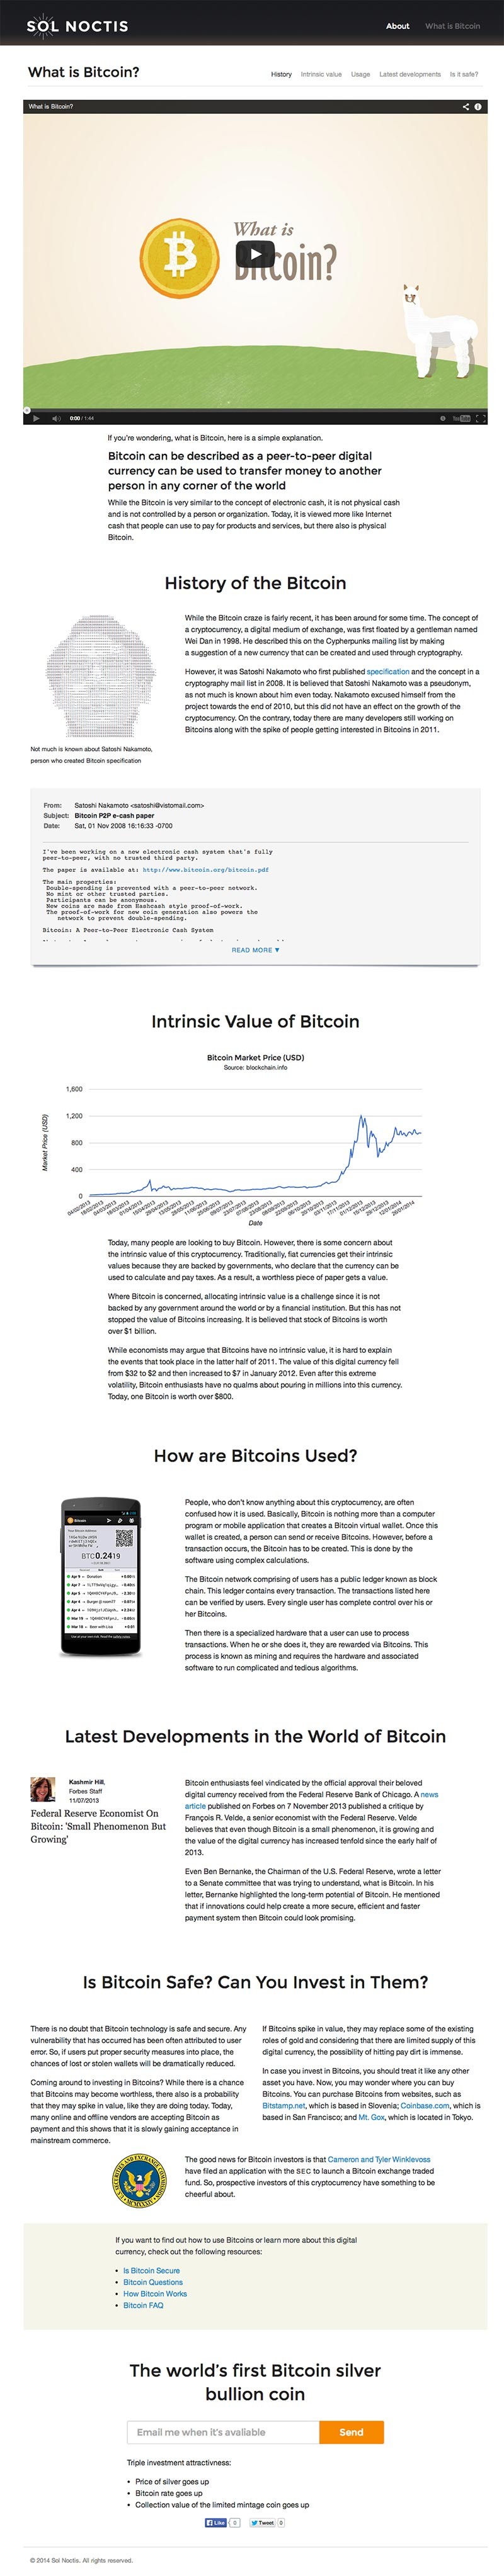 What is Bitcoin page